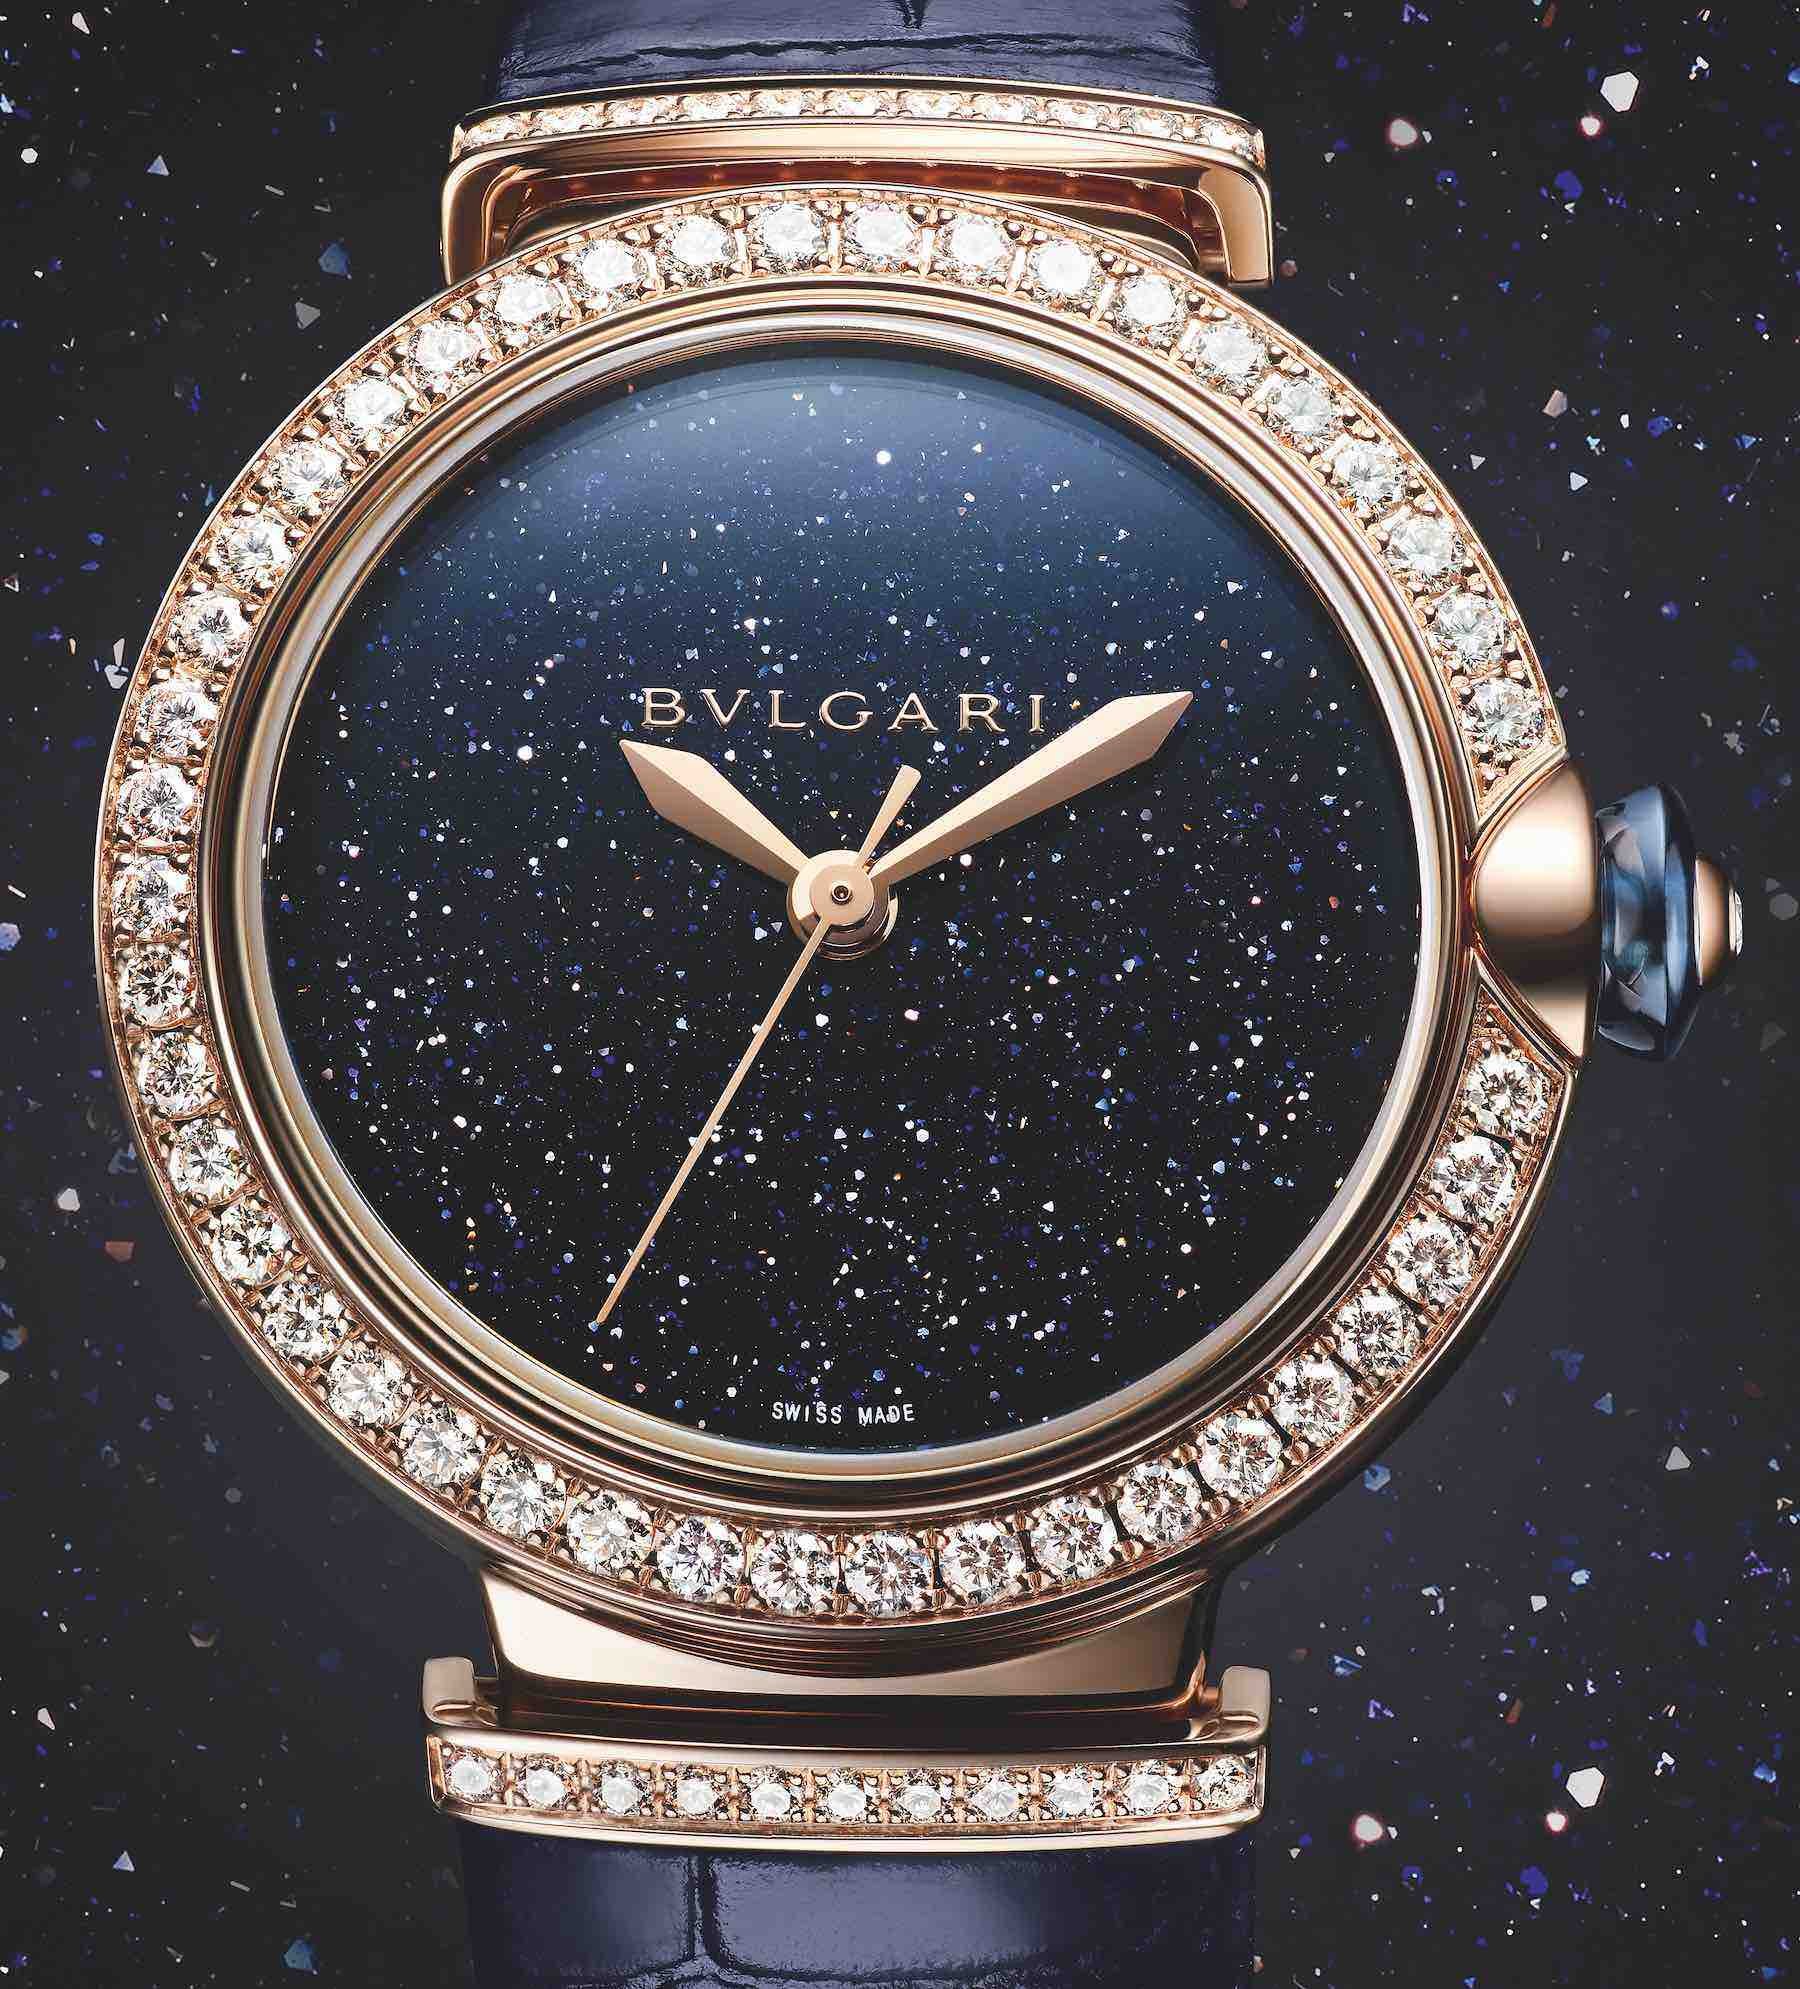 Bvlgari’s LVCEA Collection Gets An Aventurine Dial